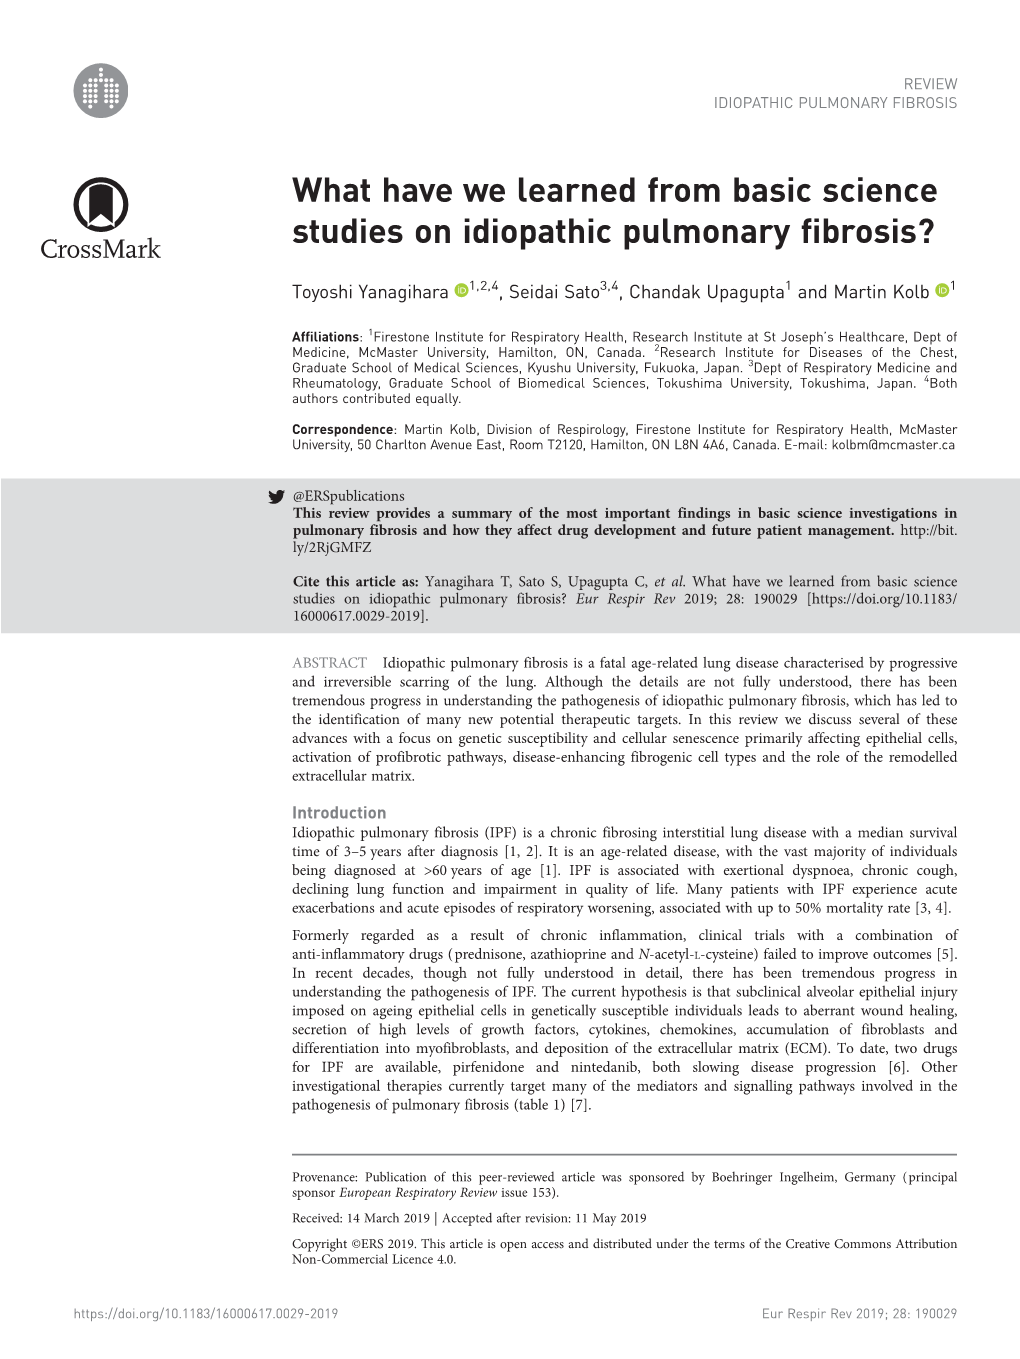 What Have We Learned from Basic Science Studies on Idiopathic Pulmonary Fibrosis?